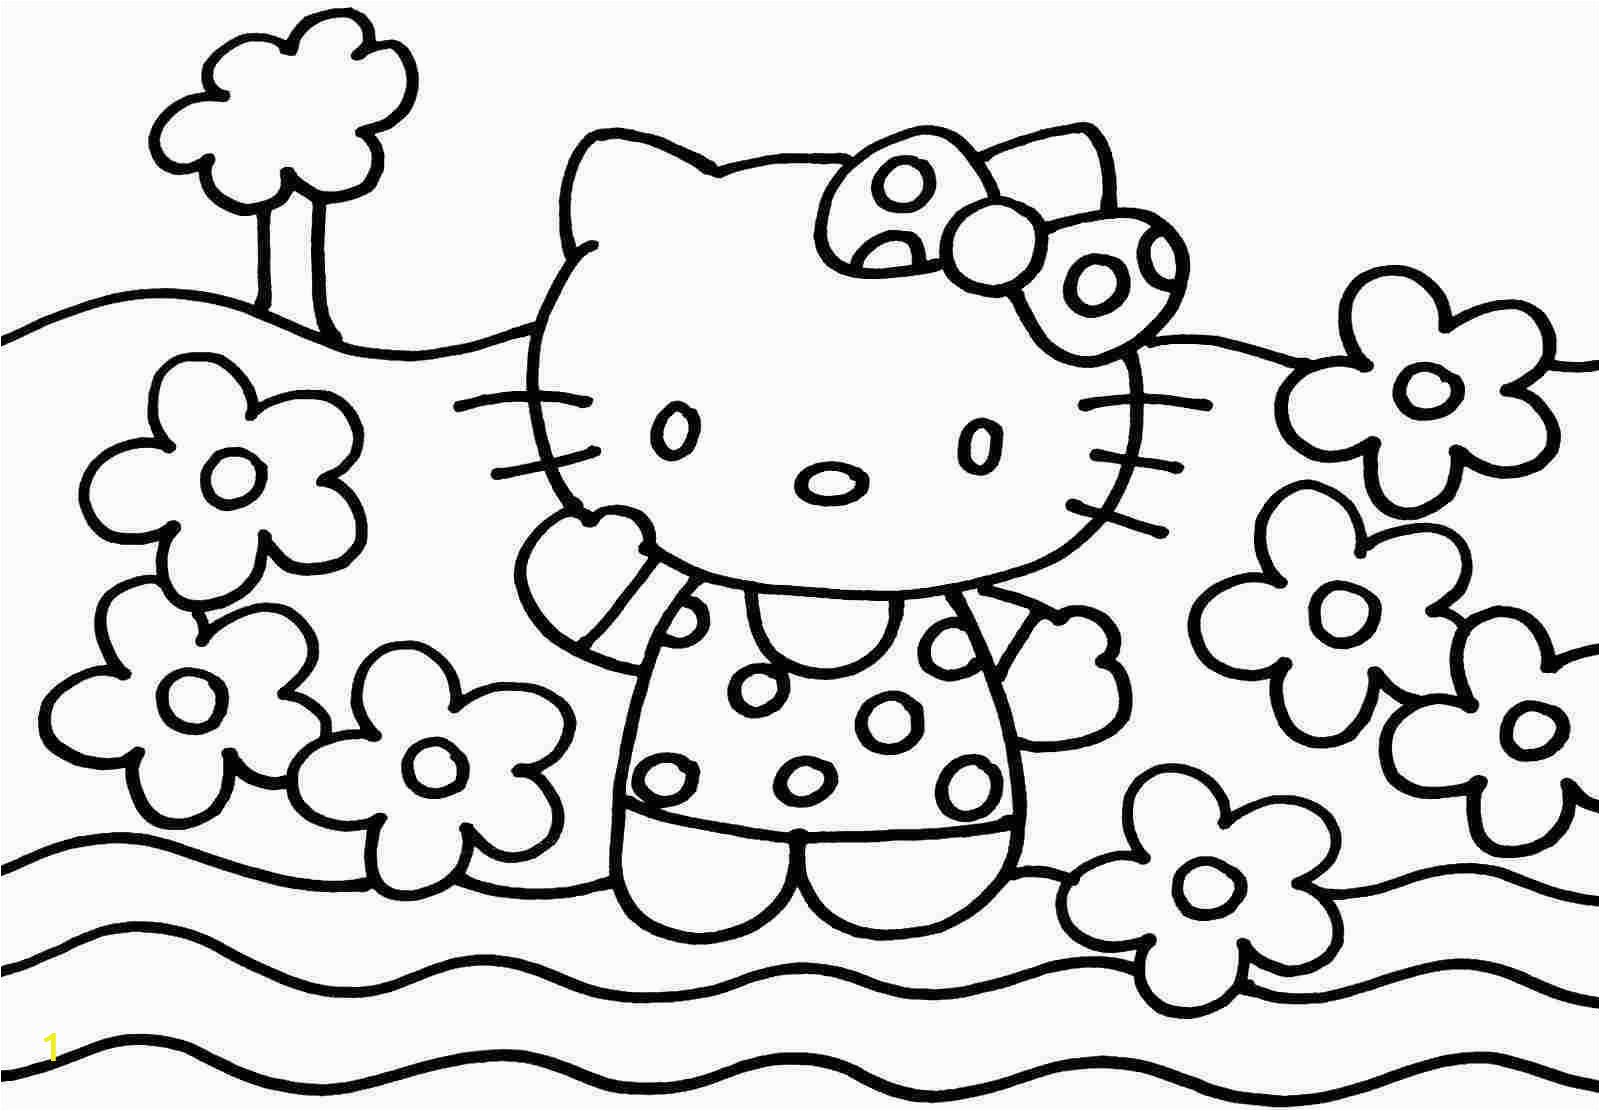 Download Colouring Pictures Hello Kitty Friends | divyajanani.org